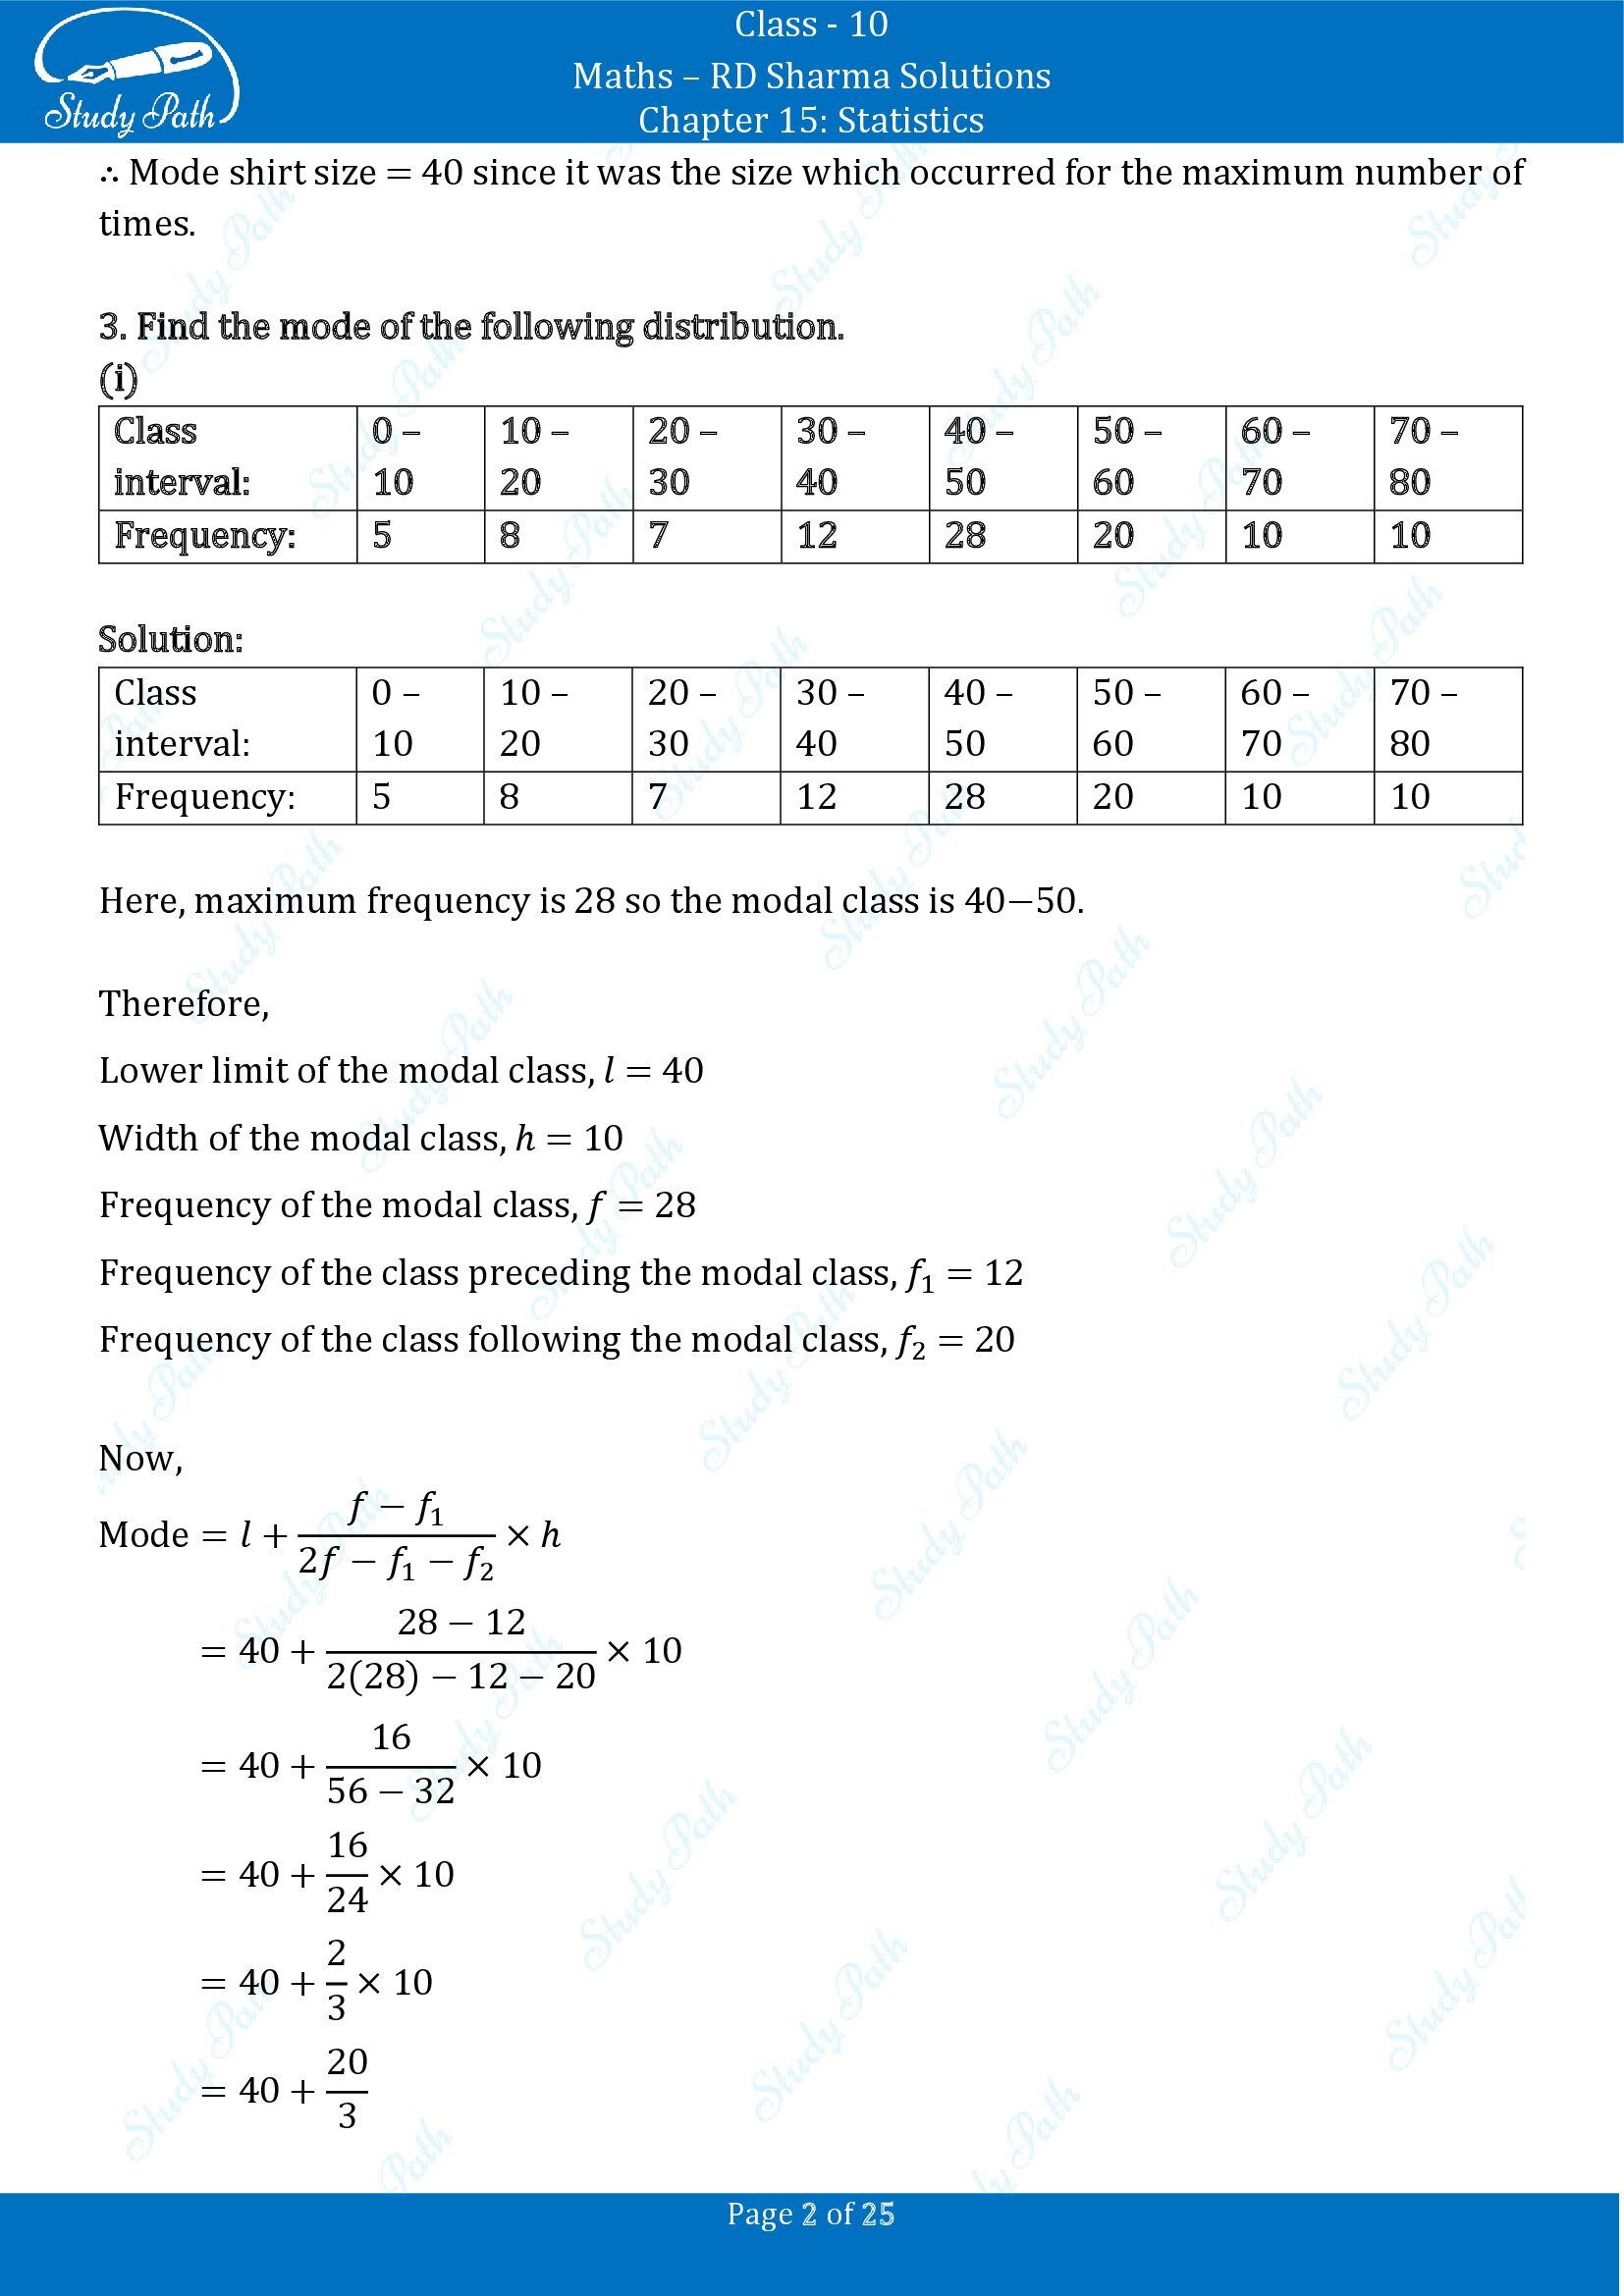 RD Sharma Solutions Class 10 Chapter 15 Statistics Exercise 15.5 00002